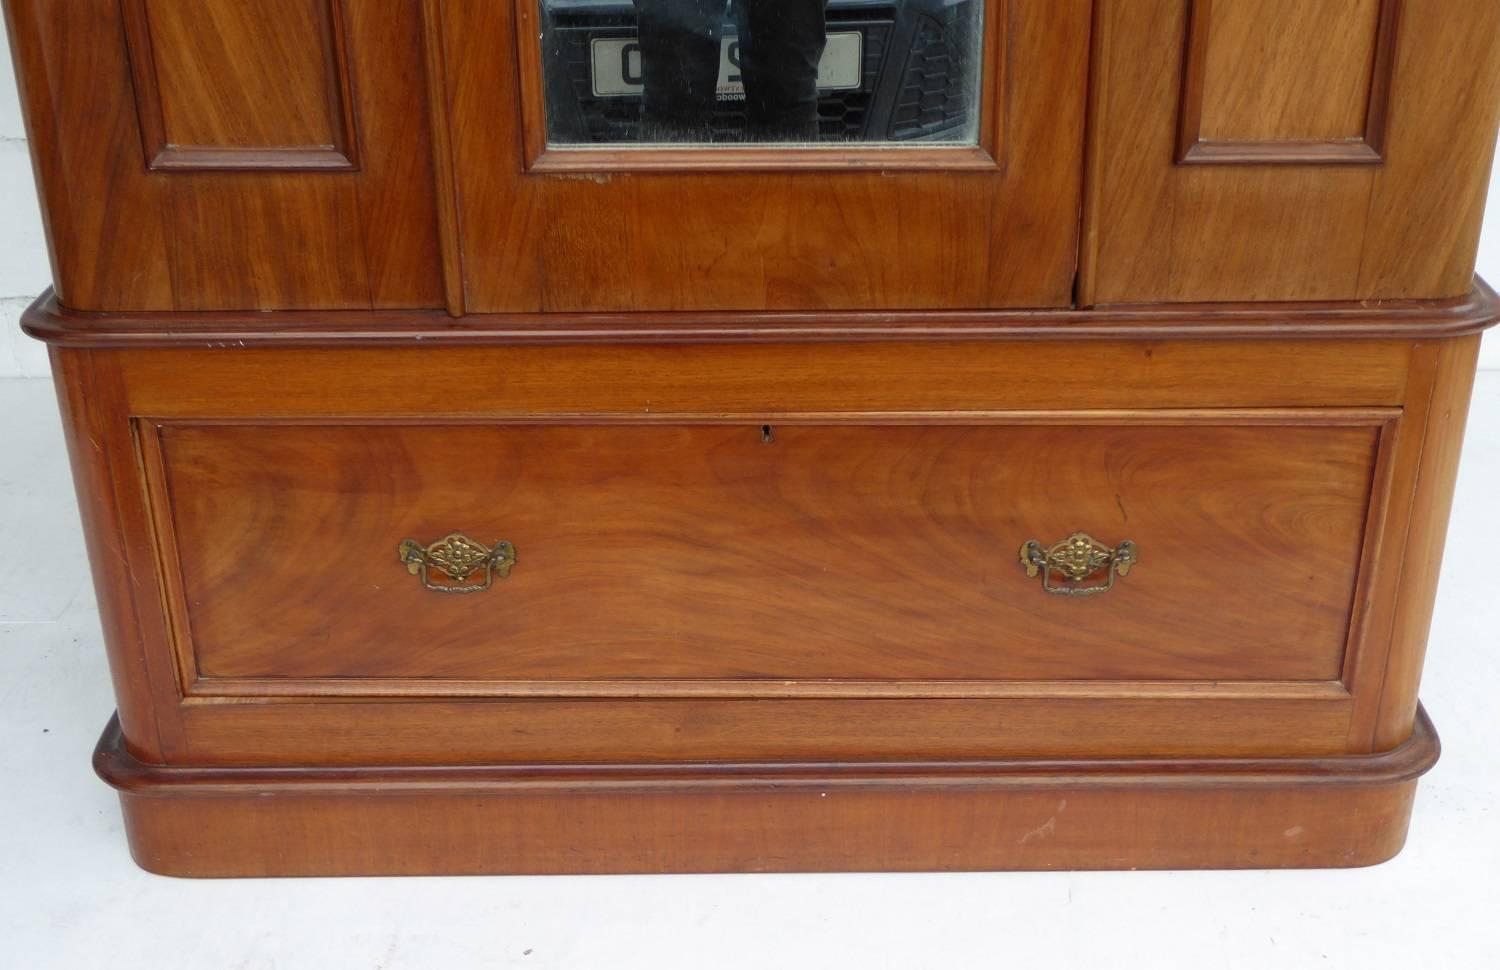 For sale is a good quality Victorian burr walnut wardrobe. The wardrobe has an out swept cornice to the top, above a single mirror door, flanked by a further two mirrors. The centre door opens to reveal two hanging rails as well as coat pegs. Below